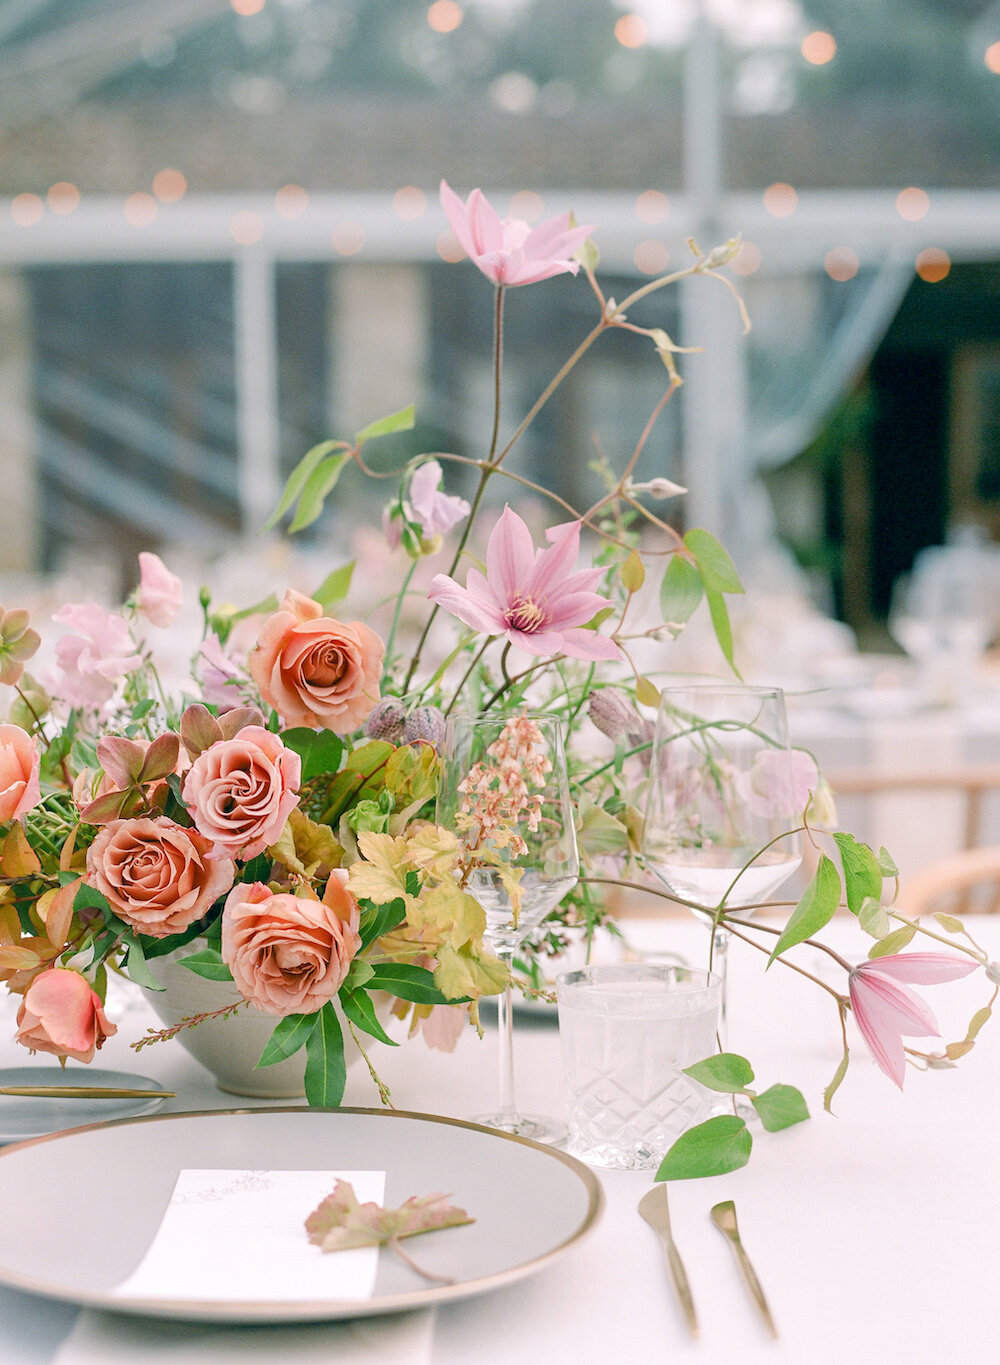  This wedding was in the latter half of May, affording us the unique blend of late spring (hellebore! frittilaria meleagris! heucherella!) and early summer (garden roses! clematis! sweet pea!) blooms.   Photo by Amanda Crean. Event Design by Natalie 